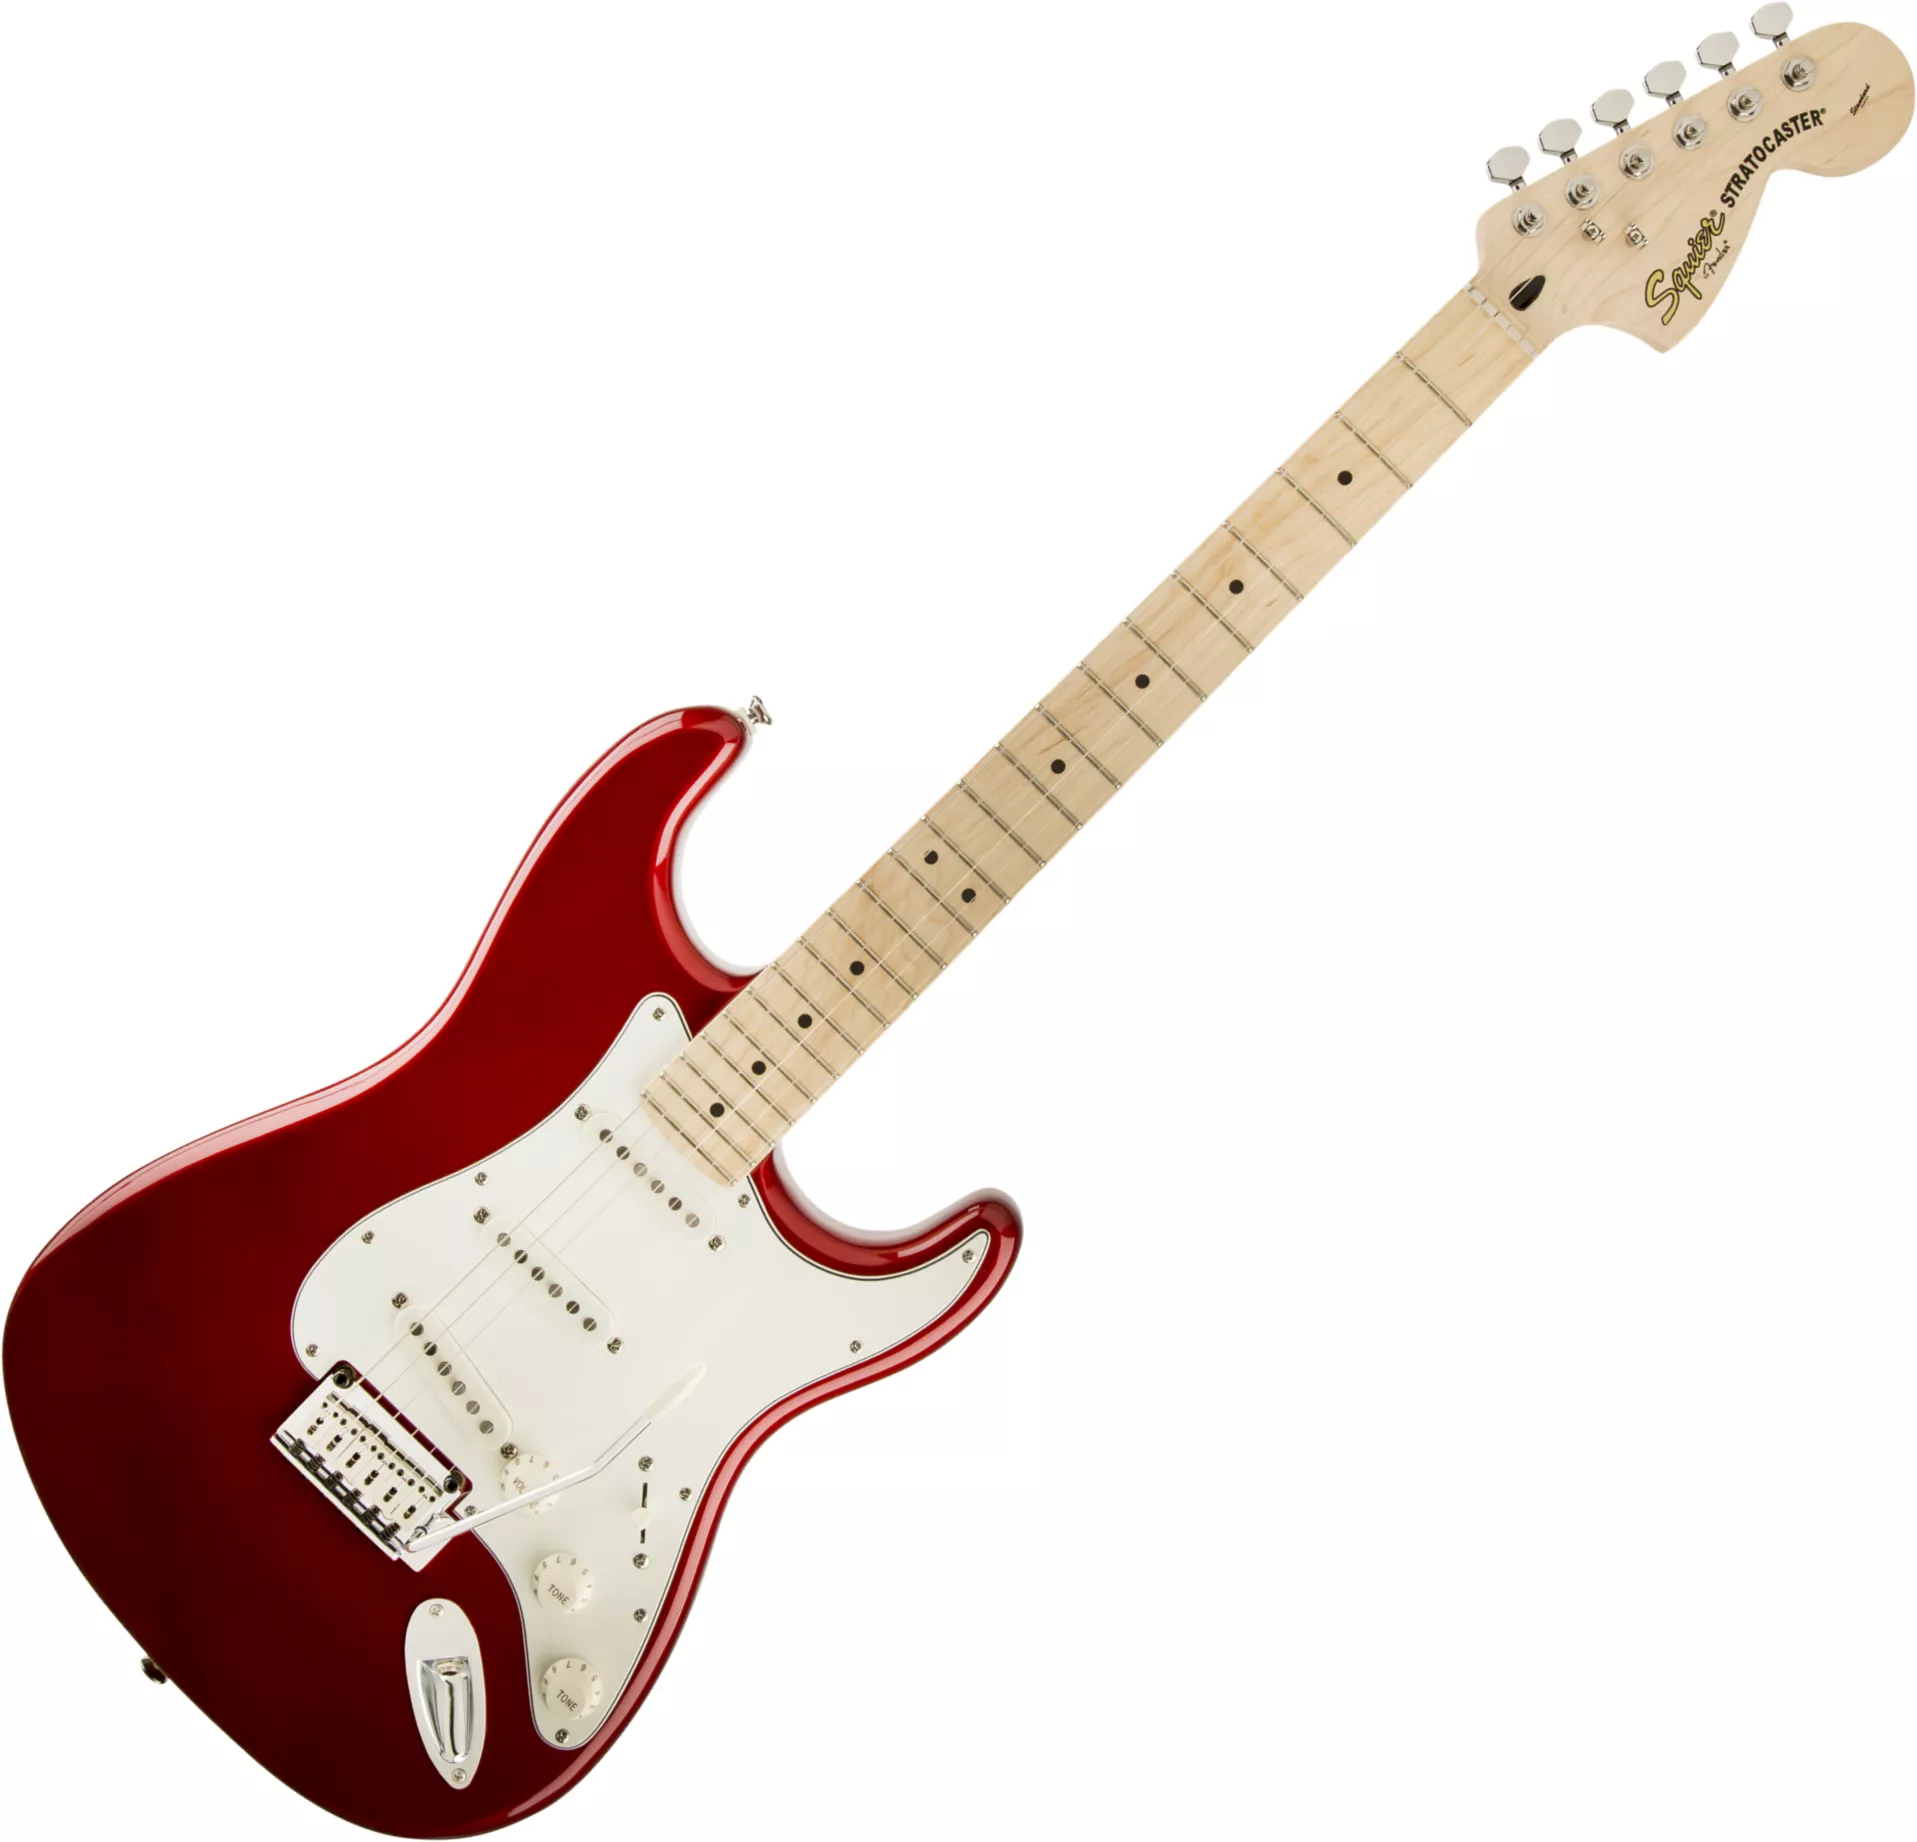 Squier Standard Stratocaster (MN) - candy apple red Str shape